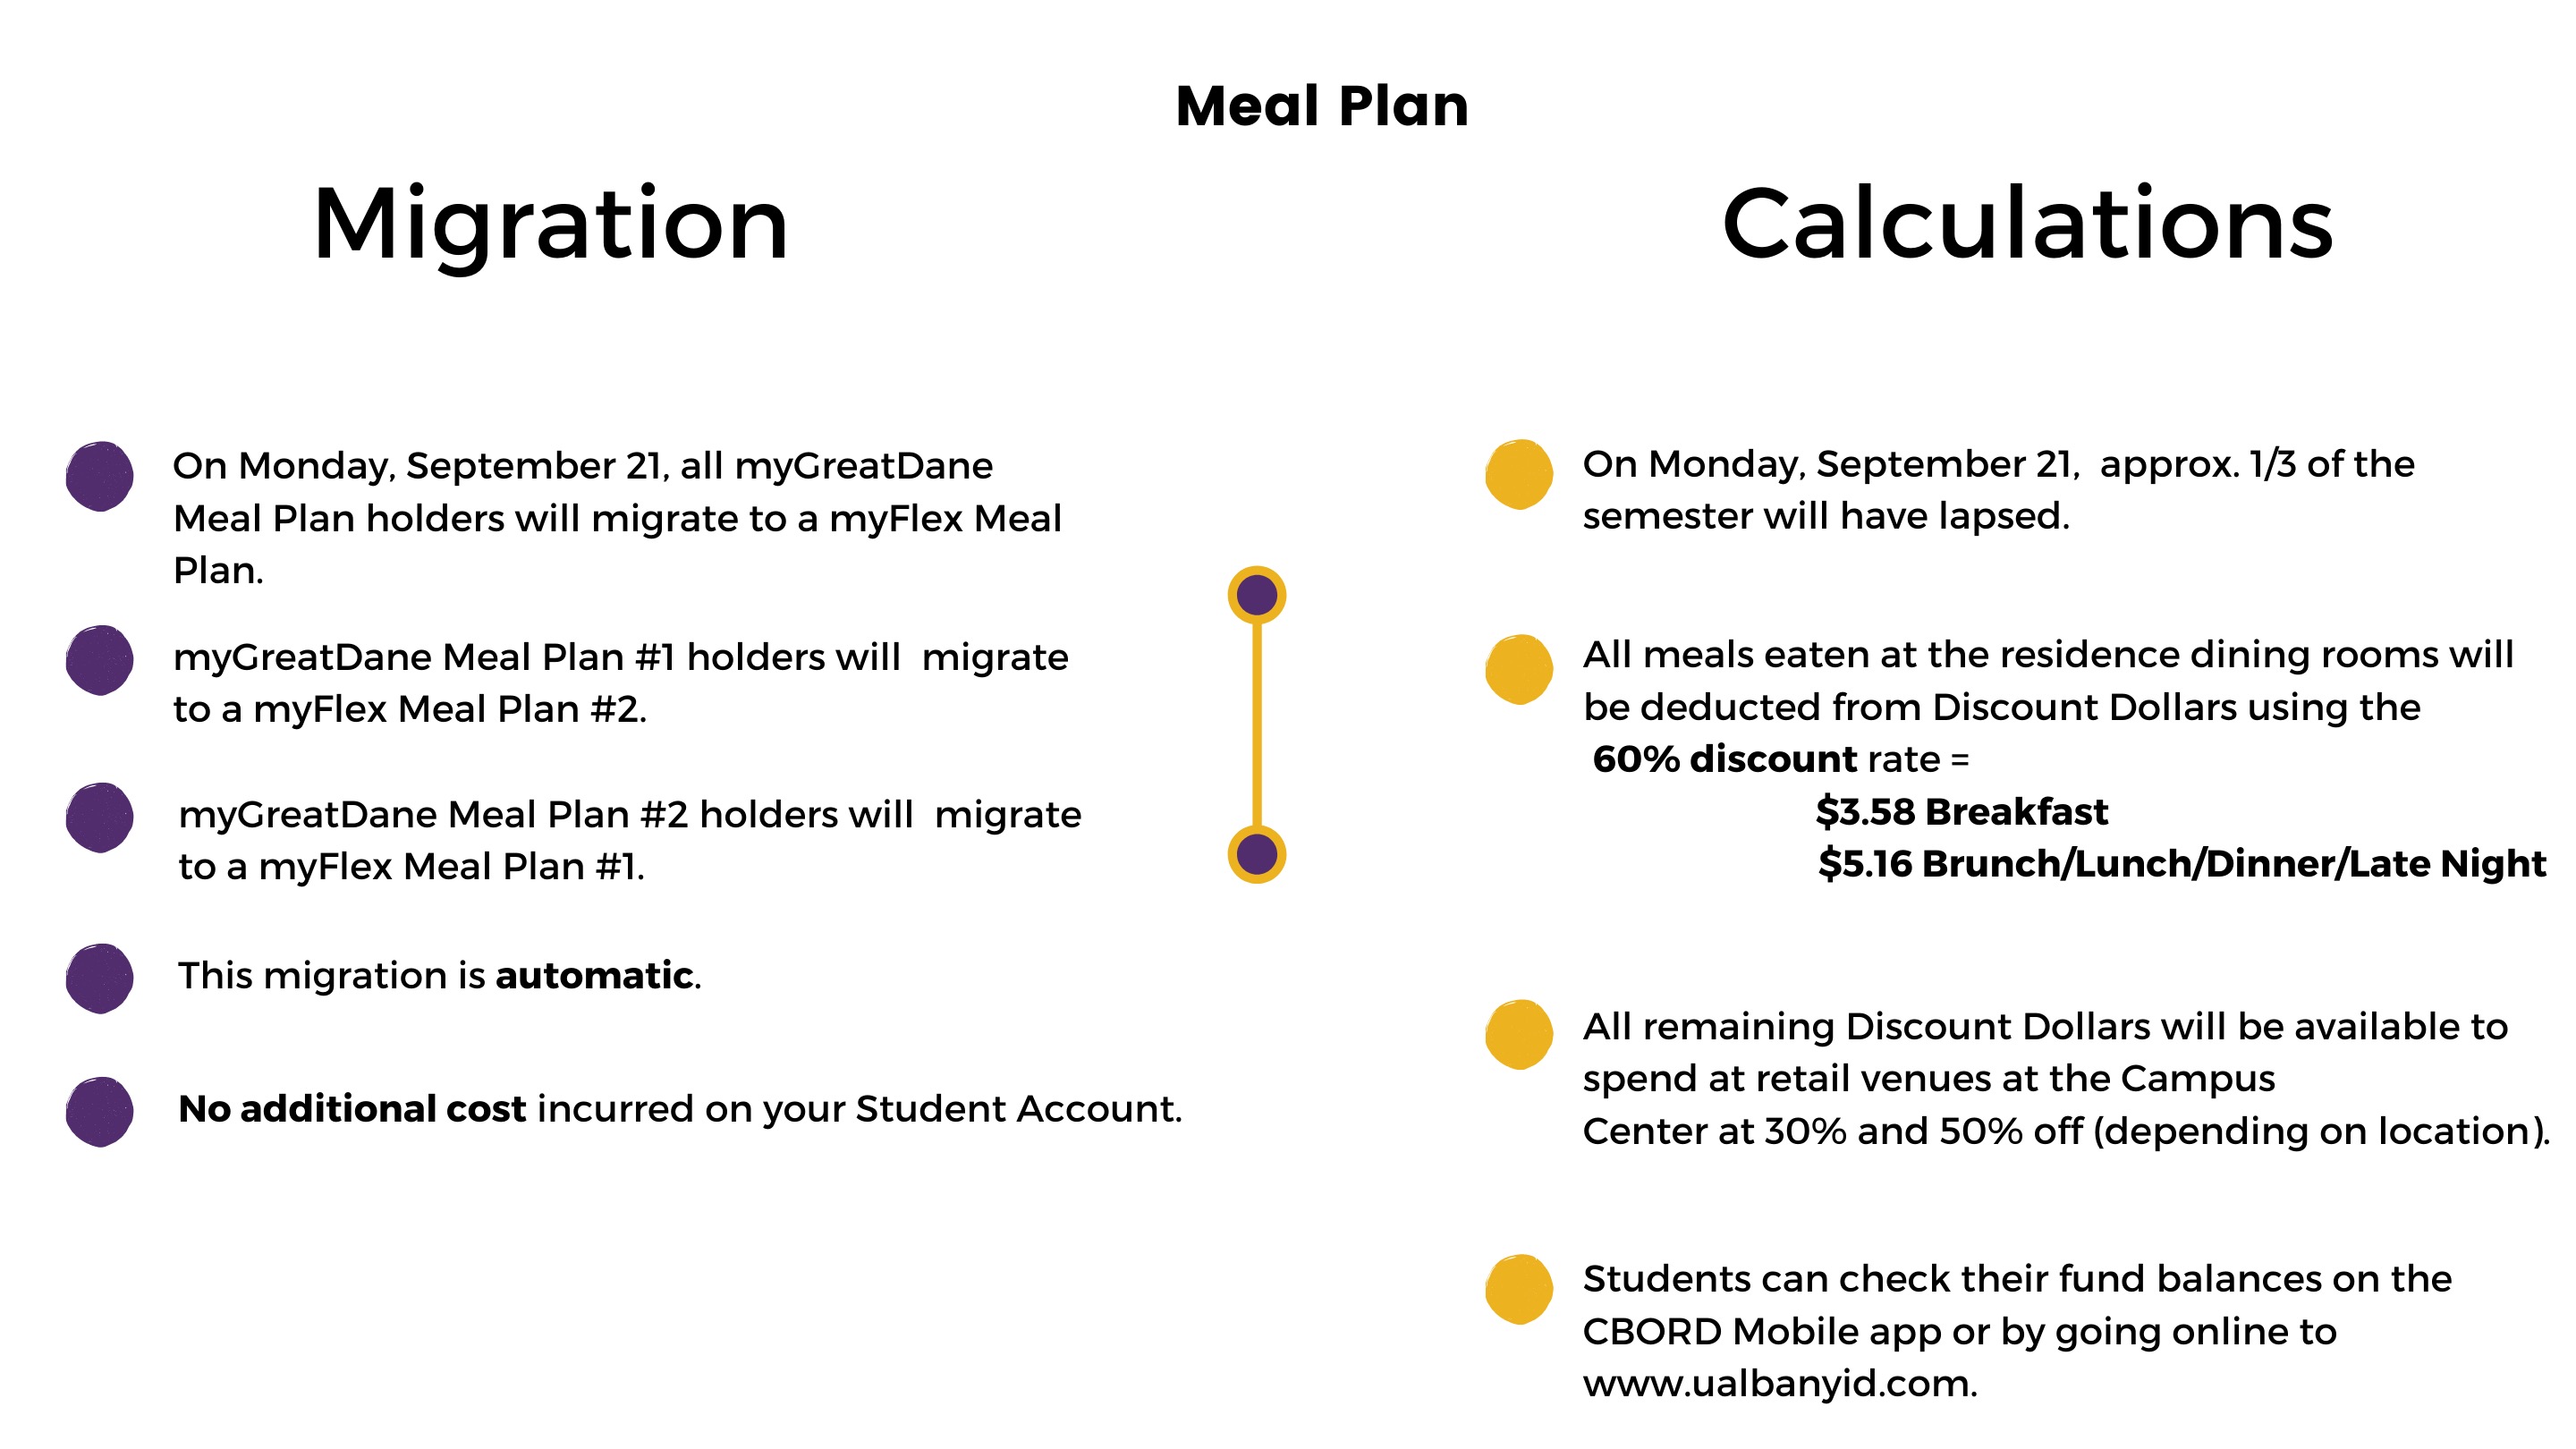 Migration: On Monday, September 21, all myGreatDane Meal Plan holders will migrate to a myFlex Meal Plan. myGreatDane Meal Plan #1 holders will  migrate to a myFlex Meal Plan #2.myGreatDane Meal Plan #2 holders will  migrate to a myFlex Meal Plan #1.This migration is automatic. Calculations. On Monday, September 21, 1/3 of the semester will have lapsed. ll meals eaten at the residence dining rooms will be deducted from Discount Dollars using the     60% discount rate =                          $3.58 Breakfast                             $5.16 Brunch/Lunch/Dinner/Late Night                            $6.60 Kosher mealsAll remaining Discount Dollars will be available to spend at retail venues at the Campus  Center at 30% and 50% off (depending on locations. Students can check their fund balances on the CBORD Mobile app or by going online to www.ualbanyid.com.